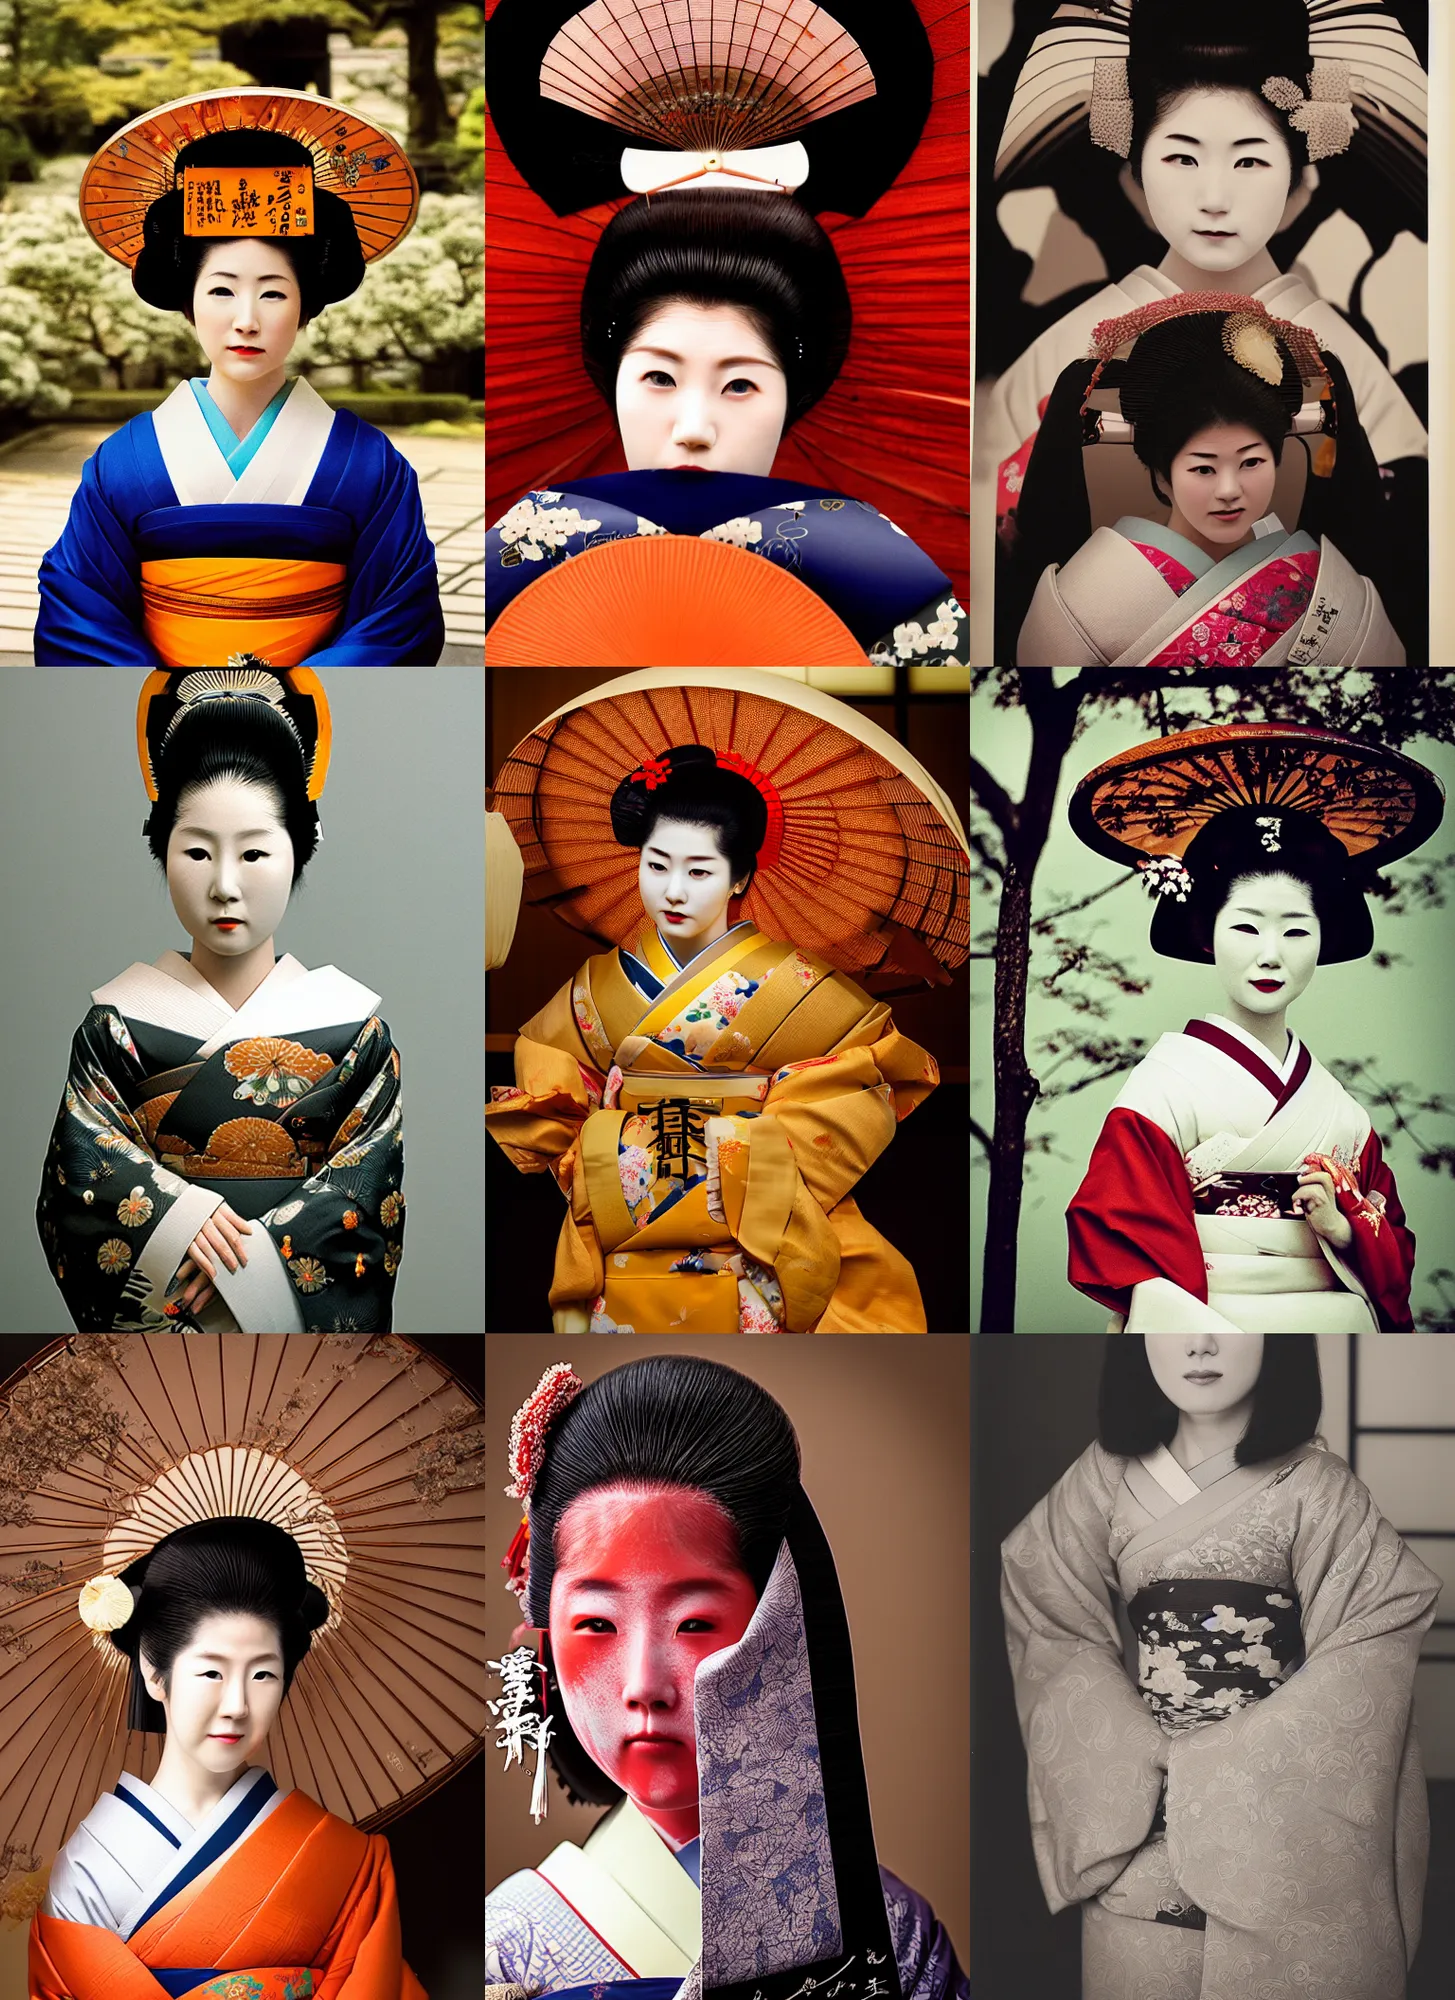 Prompt: Portrait Photograph of a Japanese Geisha Amber T800